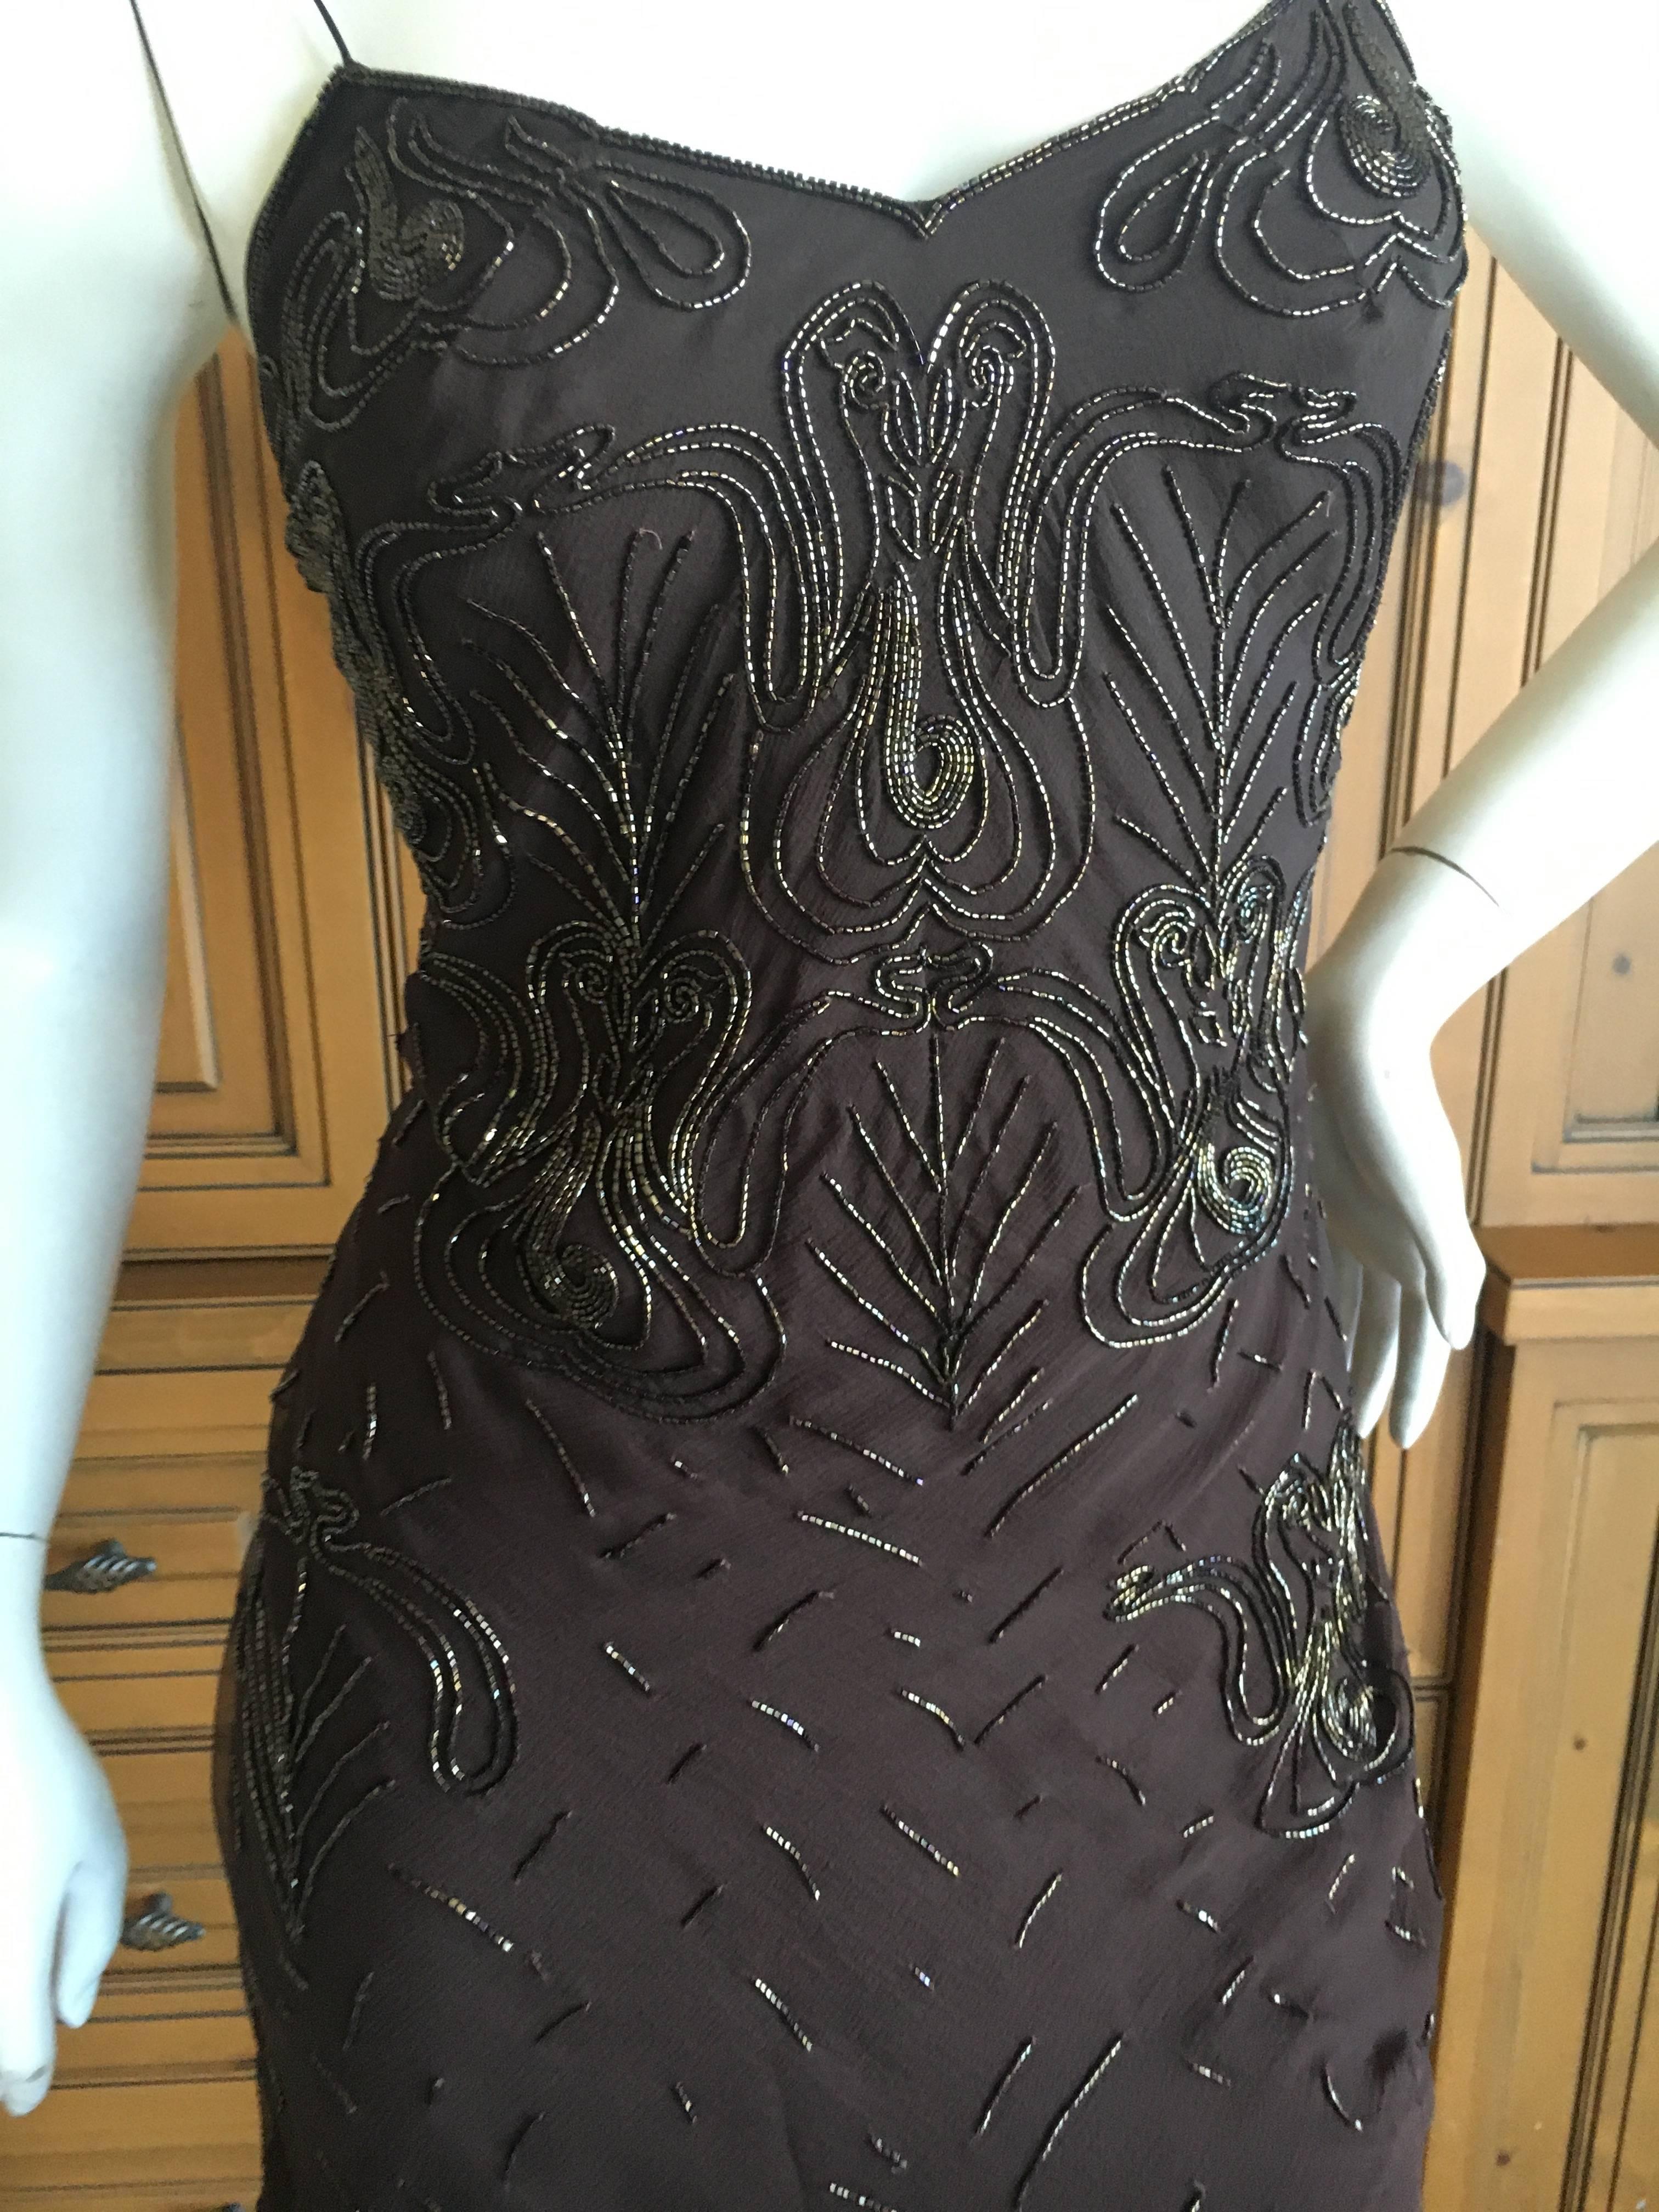 Christian Dior Bead Embellished Silk Chiffon Cocktail Dress by John Galliano  In Excellent Condition For Sale In Cloverdale, CA